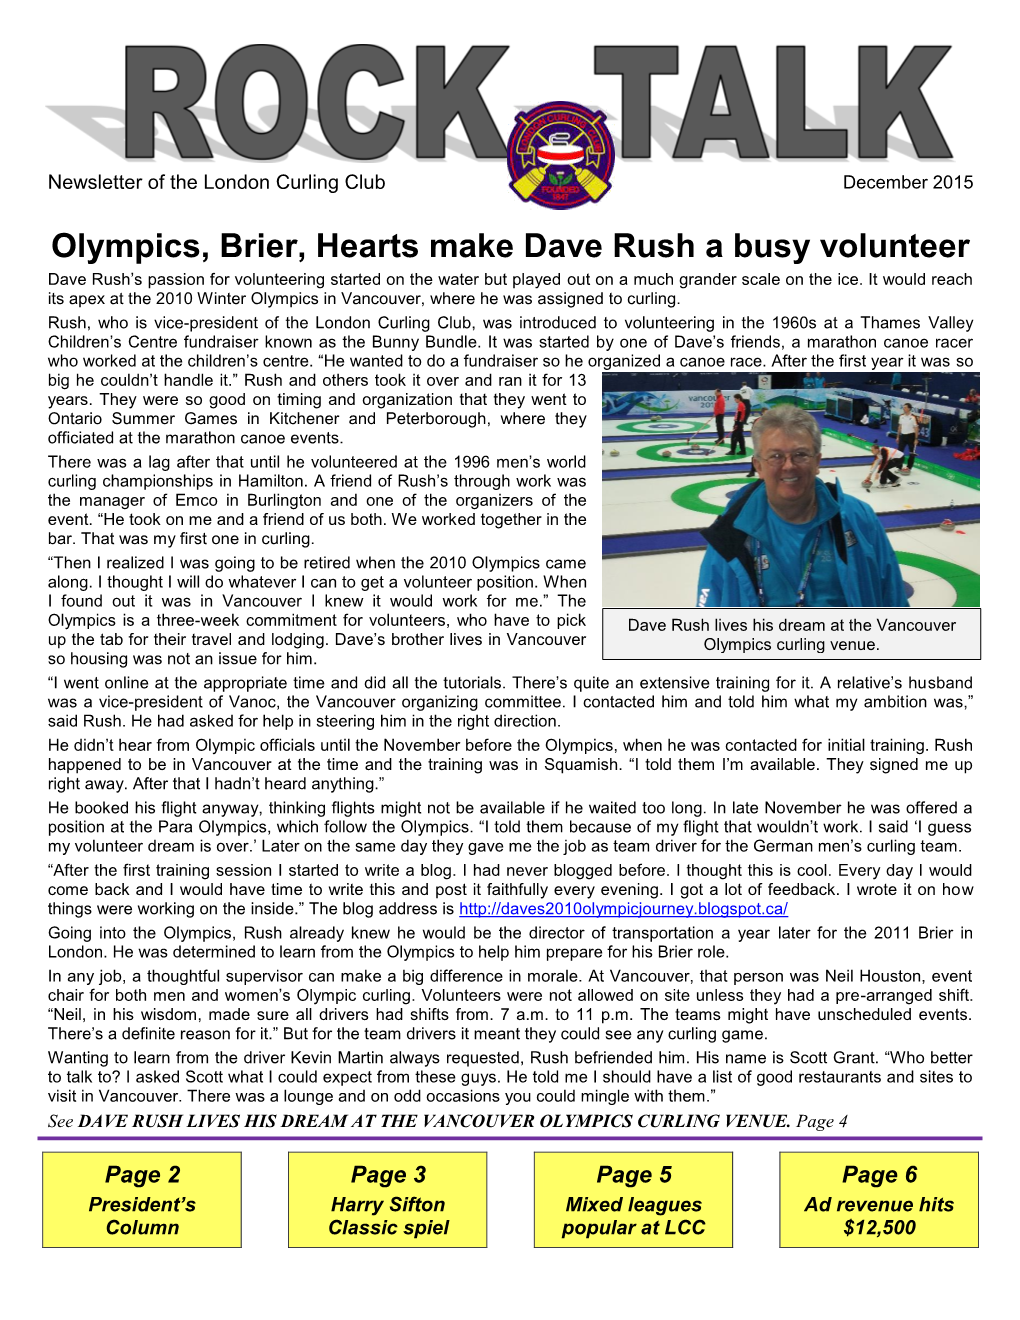 Olympics, Brier, Hearts Make Dave Rush a Busy Volunteer Dave Rush’S Passion for Volunteering Started on the Water but Played out on a Much Grander Scale on the Ice